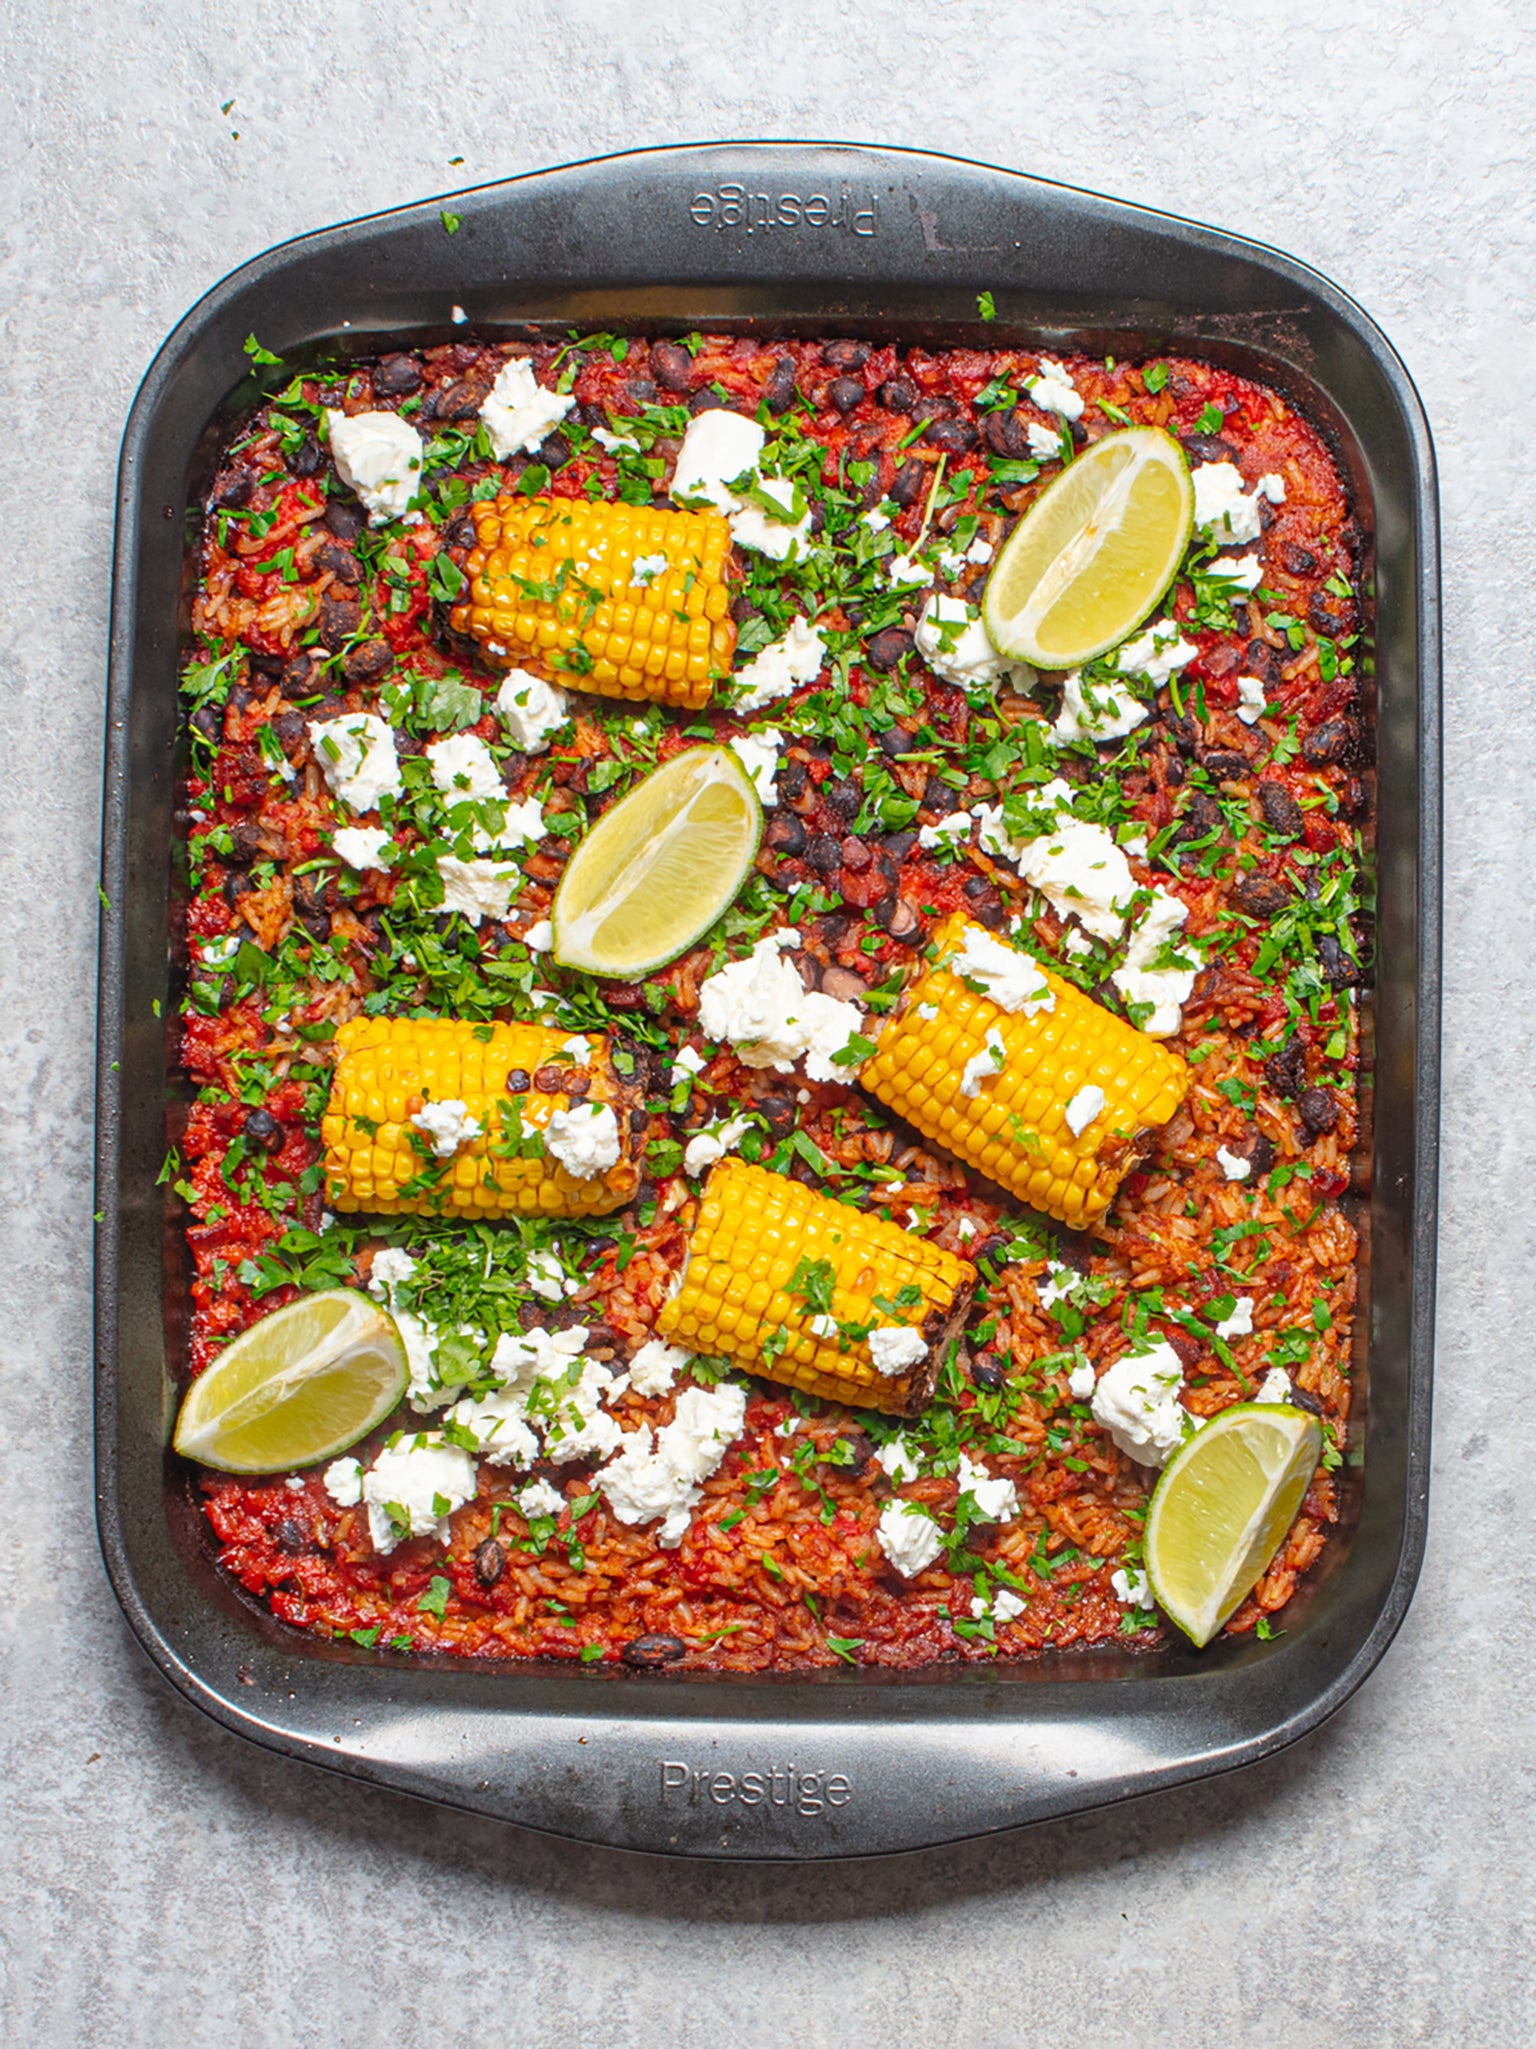 A colourful and spicy combination of sweet corn, black beans and chorizo, perfect for warm weather dining